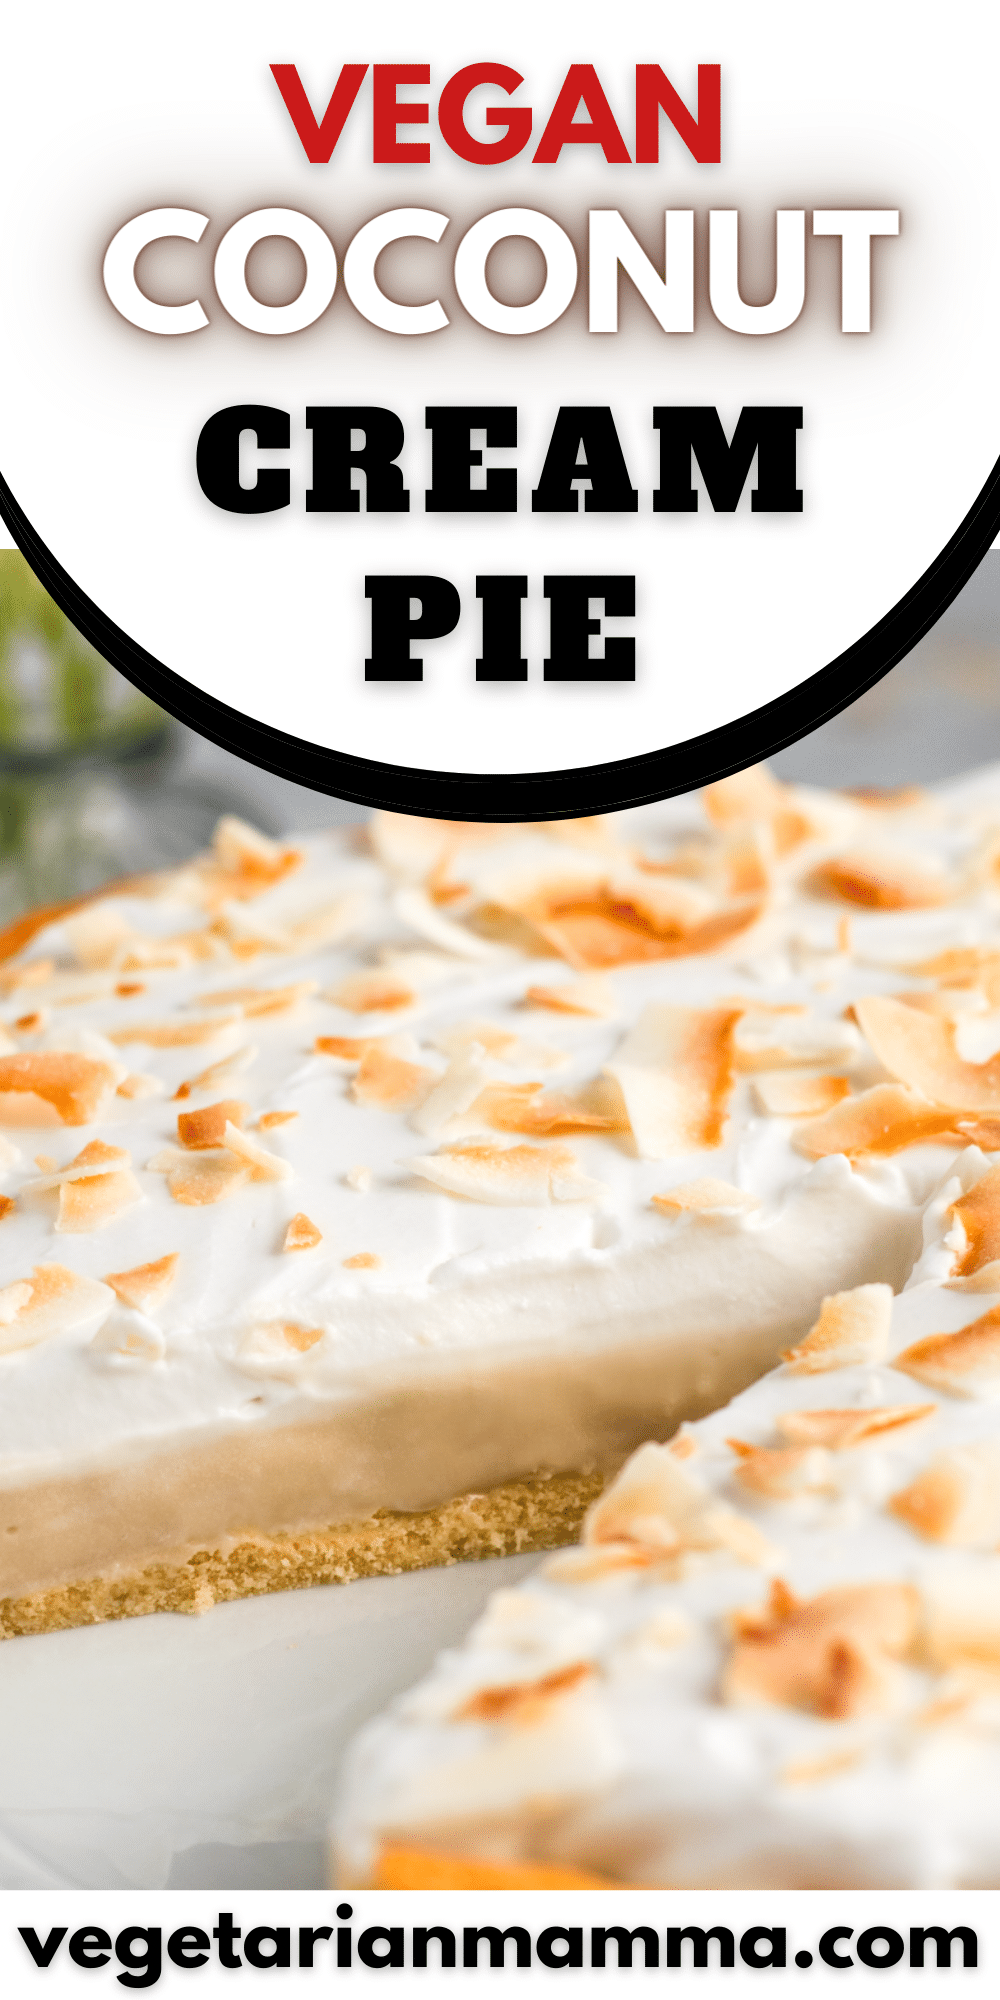 This simple recipe for Vegan Coconut Cream Pie has so much delicious. sweet, coconut flavor! You'll love how easy it is to make a vegan cream pie with canned coconut milk and coconut cream.